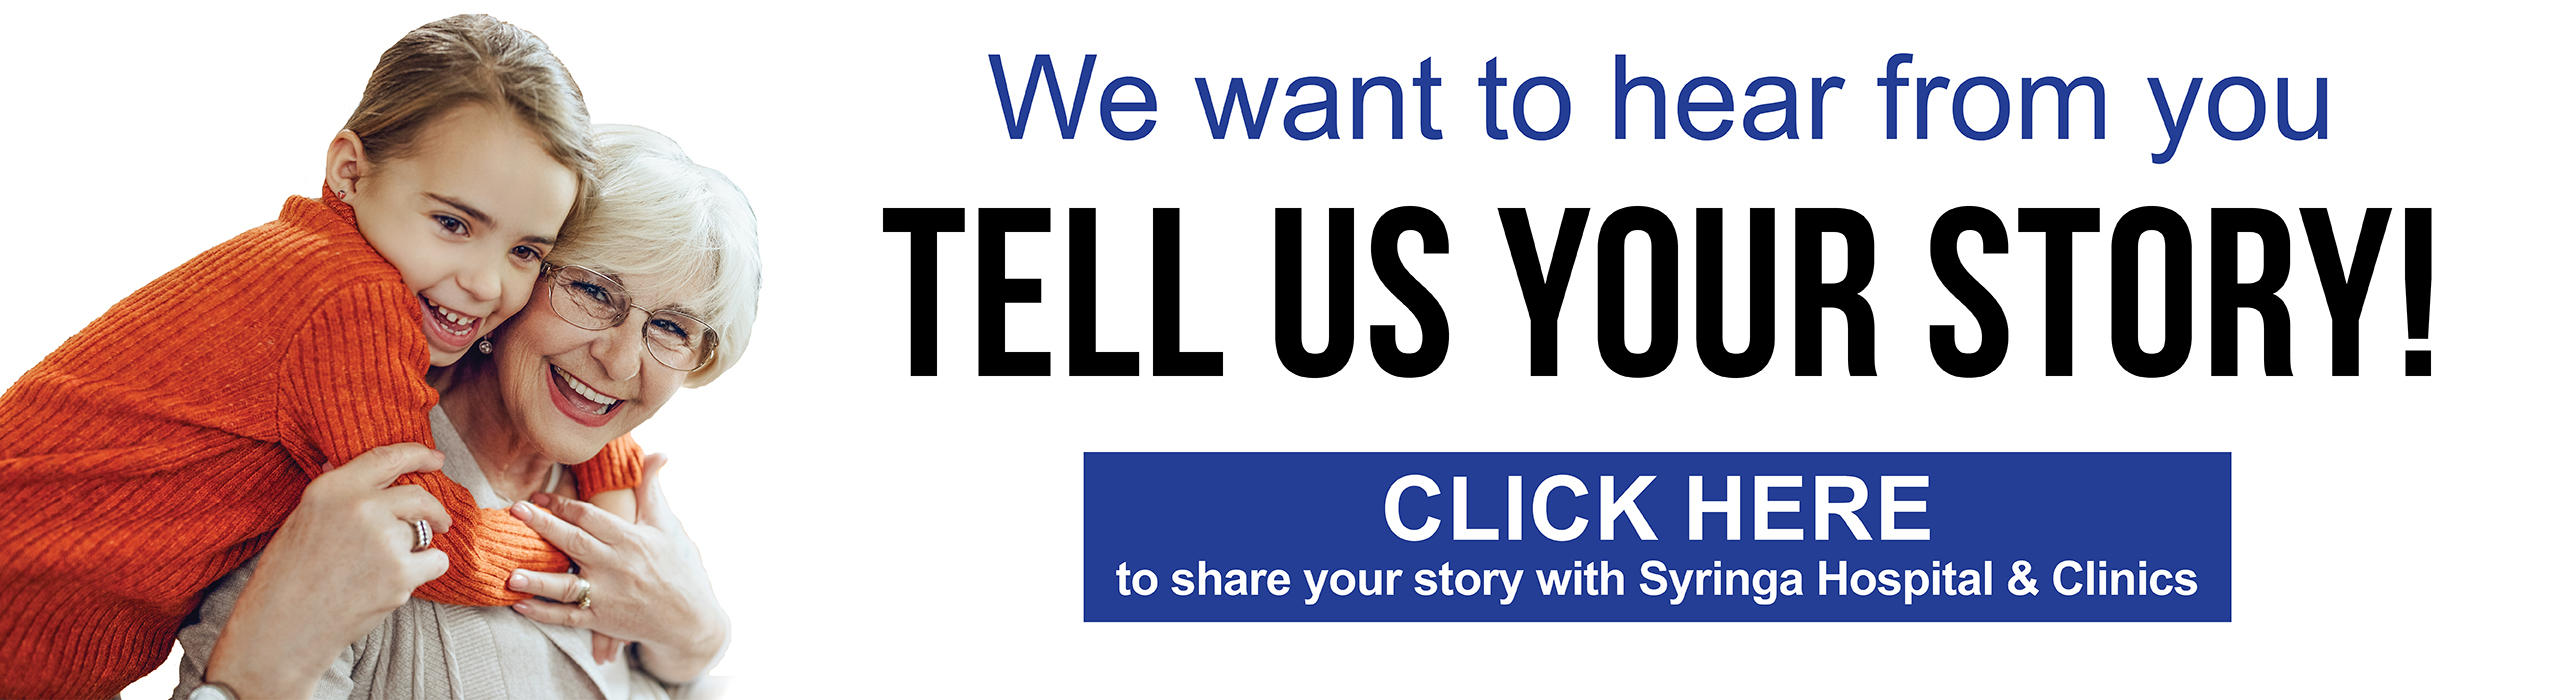 Banner picture of a family. There is a grandmother, grandfather, two grandchildren (male and female) and their parents. Banner says:

We want to hear from you
TELL US YOUR STORY!
CLICK HERE
to share your story with Syringa Hospital & Clinics